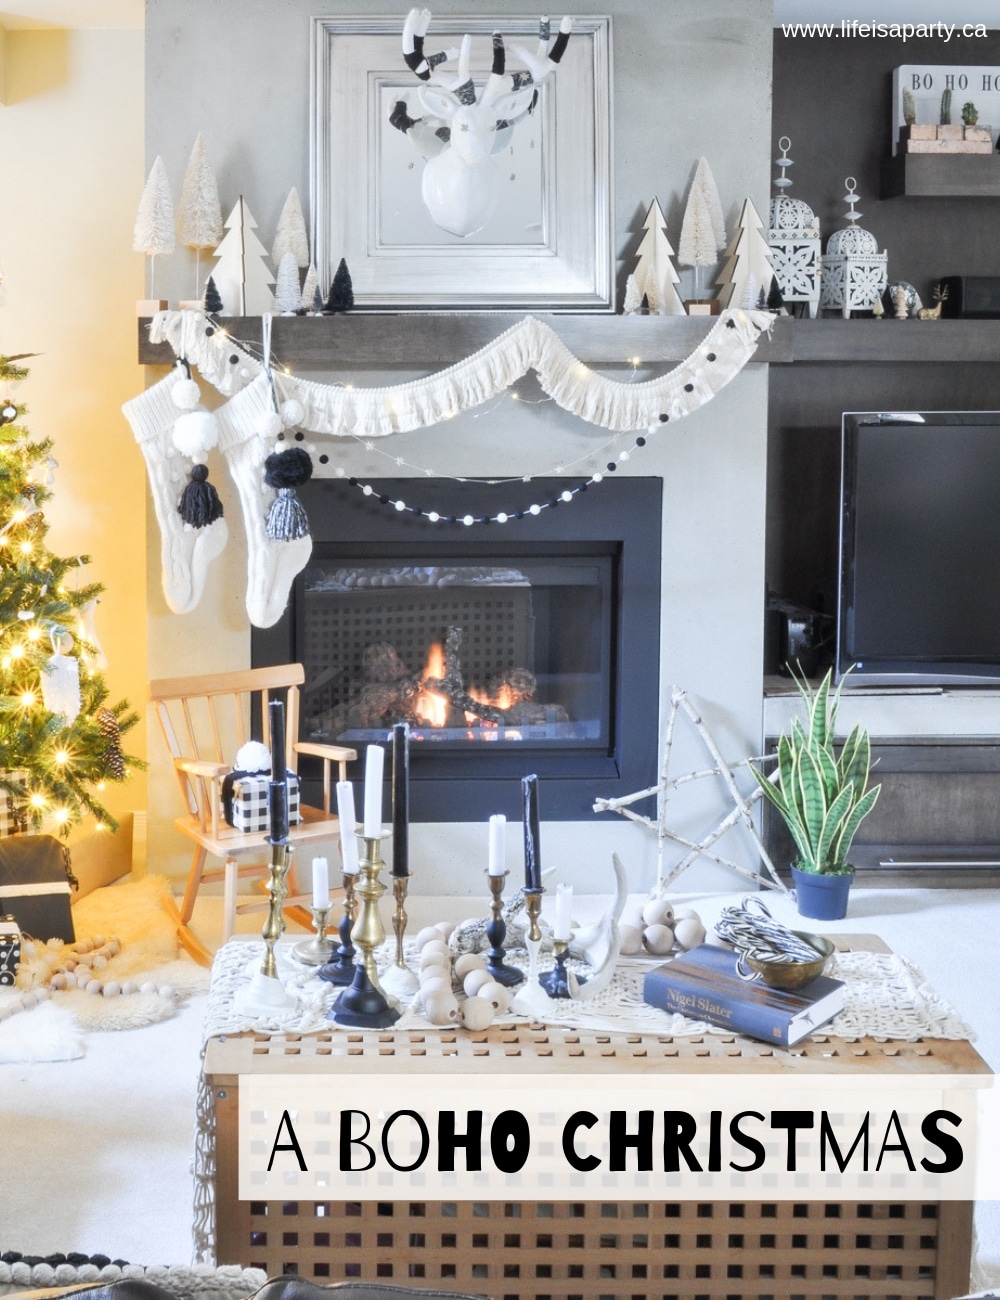 Boho Christmas Decor: decorated for Christmas with black and white boho including lots of texture, tassels, pom poms, brass, wood, and twinkle lights.